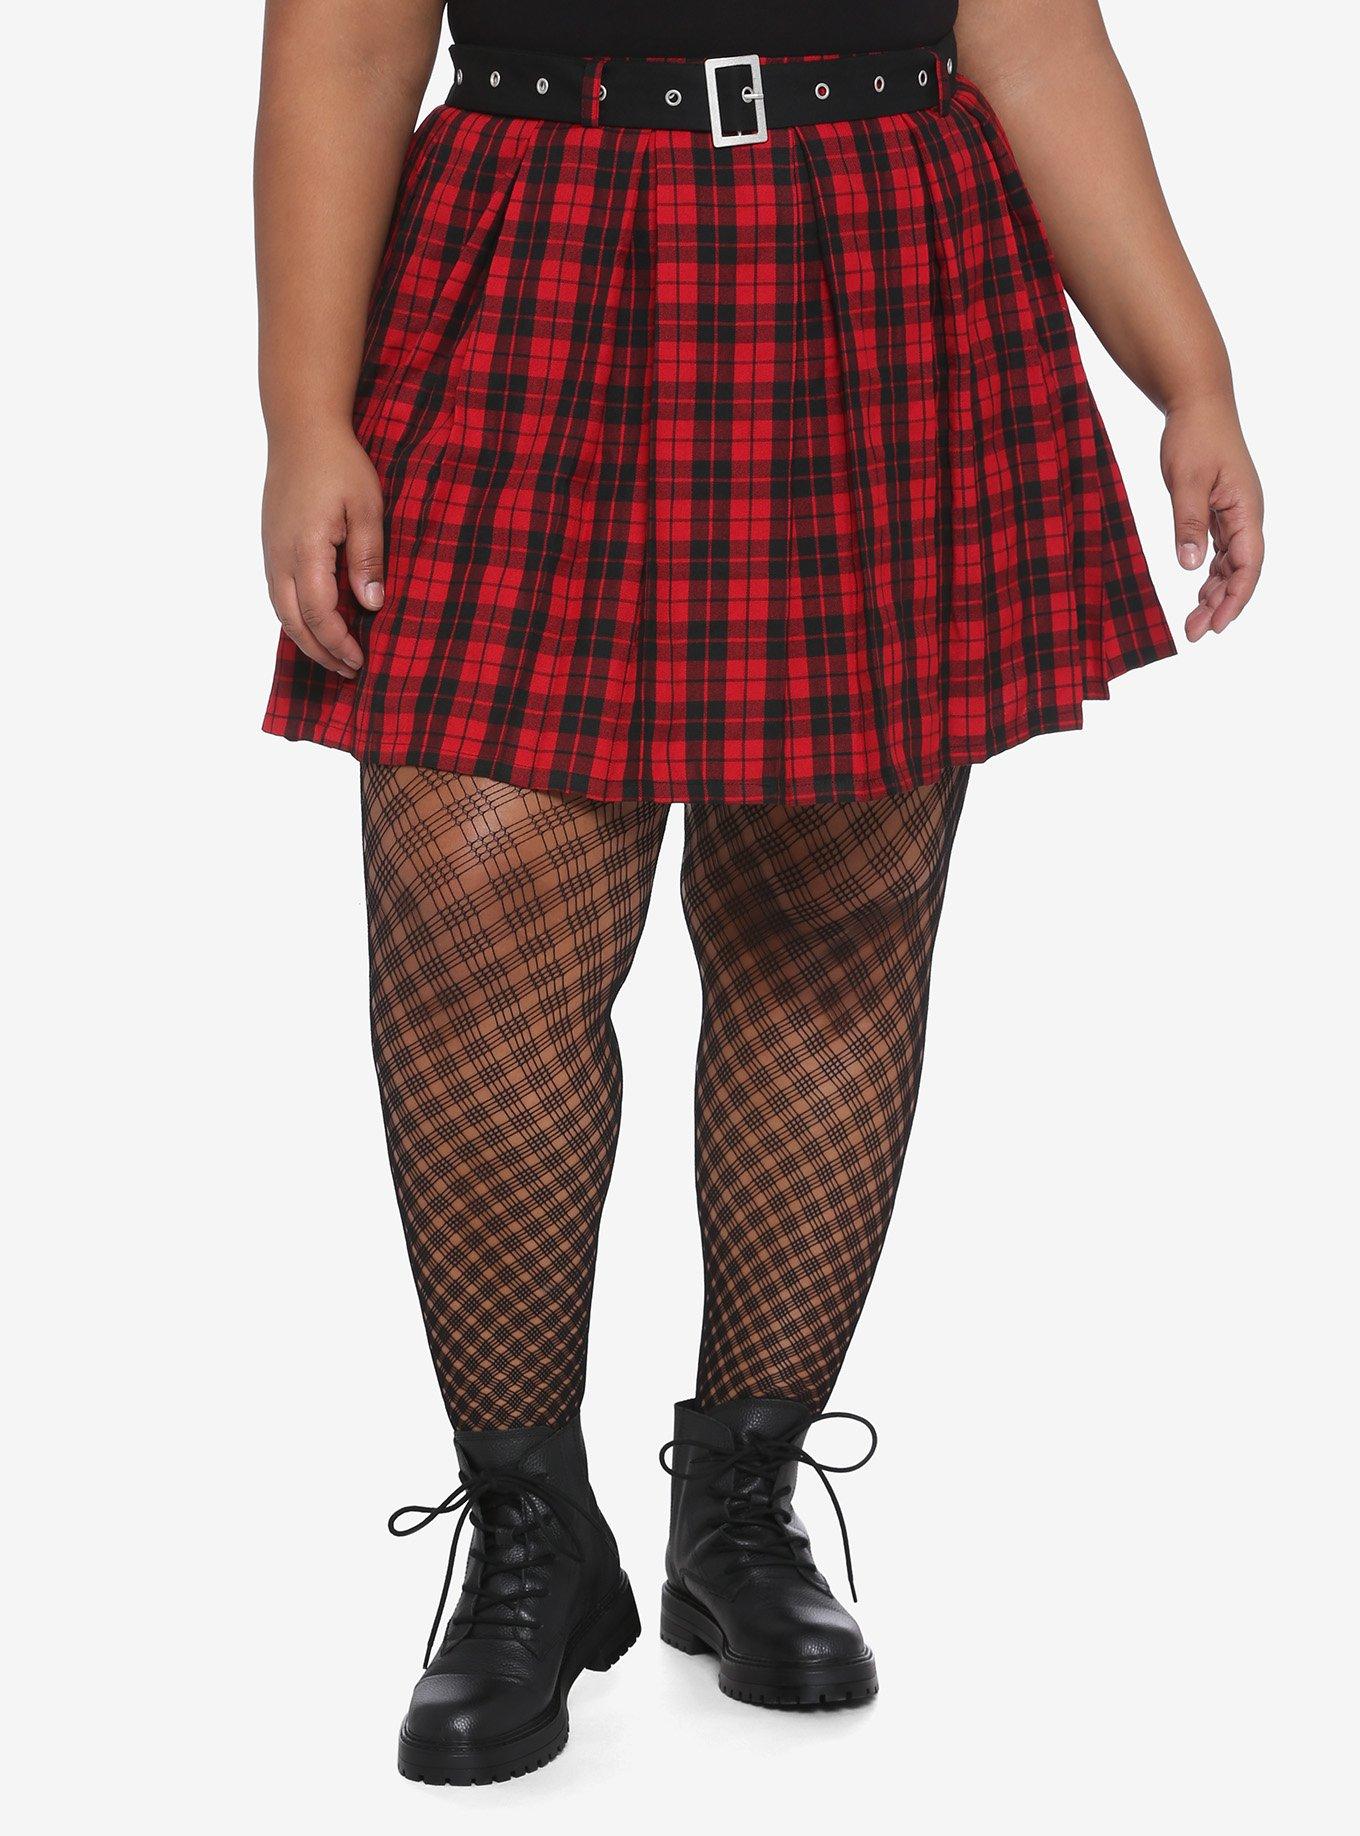 Red & Black Pleated Skirt With Grommet Belt Plus Size, PLAID - RED, hi-res